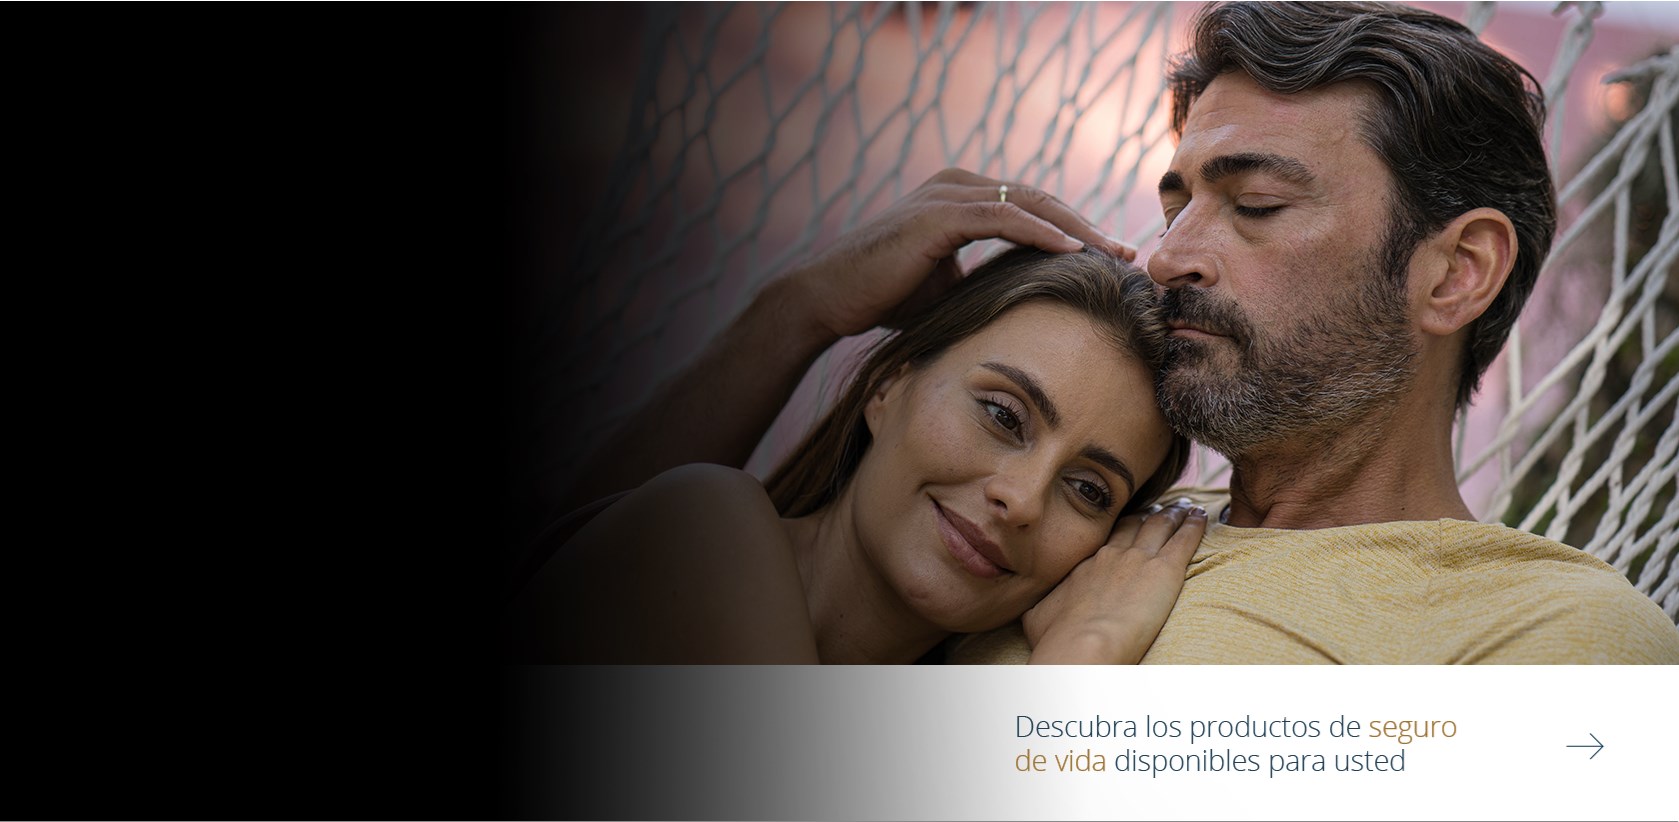 Married Latin American couple reading a magazine on life insurance coverage in Latin America by Pan-American Life Insurance Group